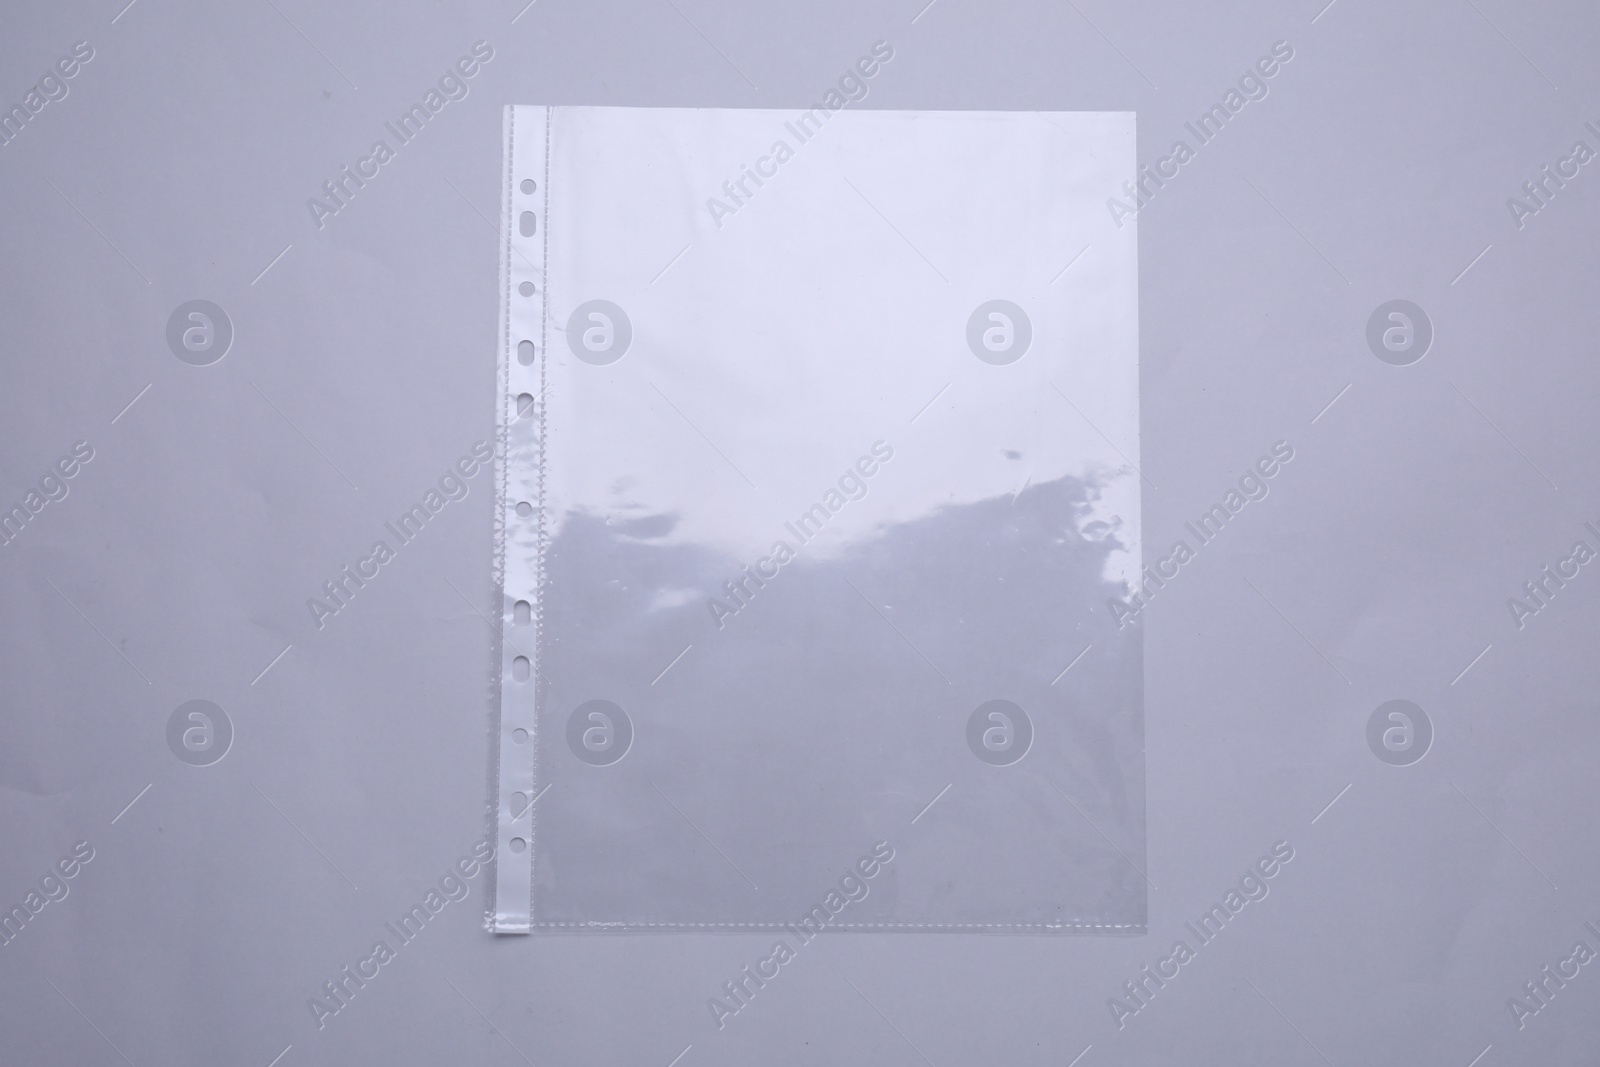 Photo of Empty punched pocket on light grey background, top view